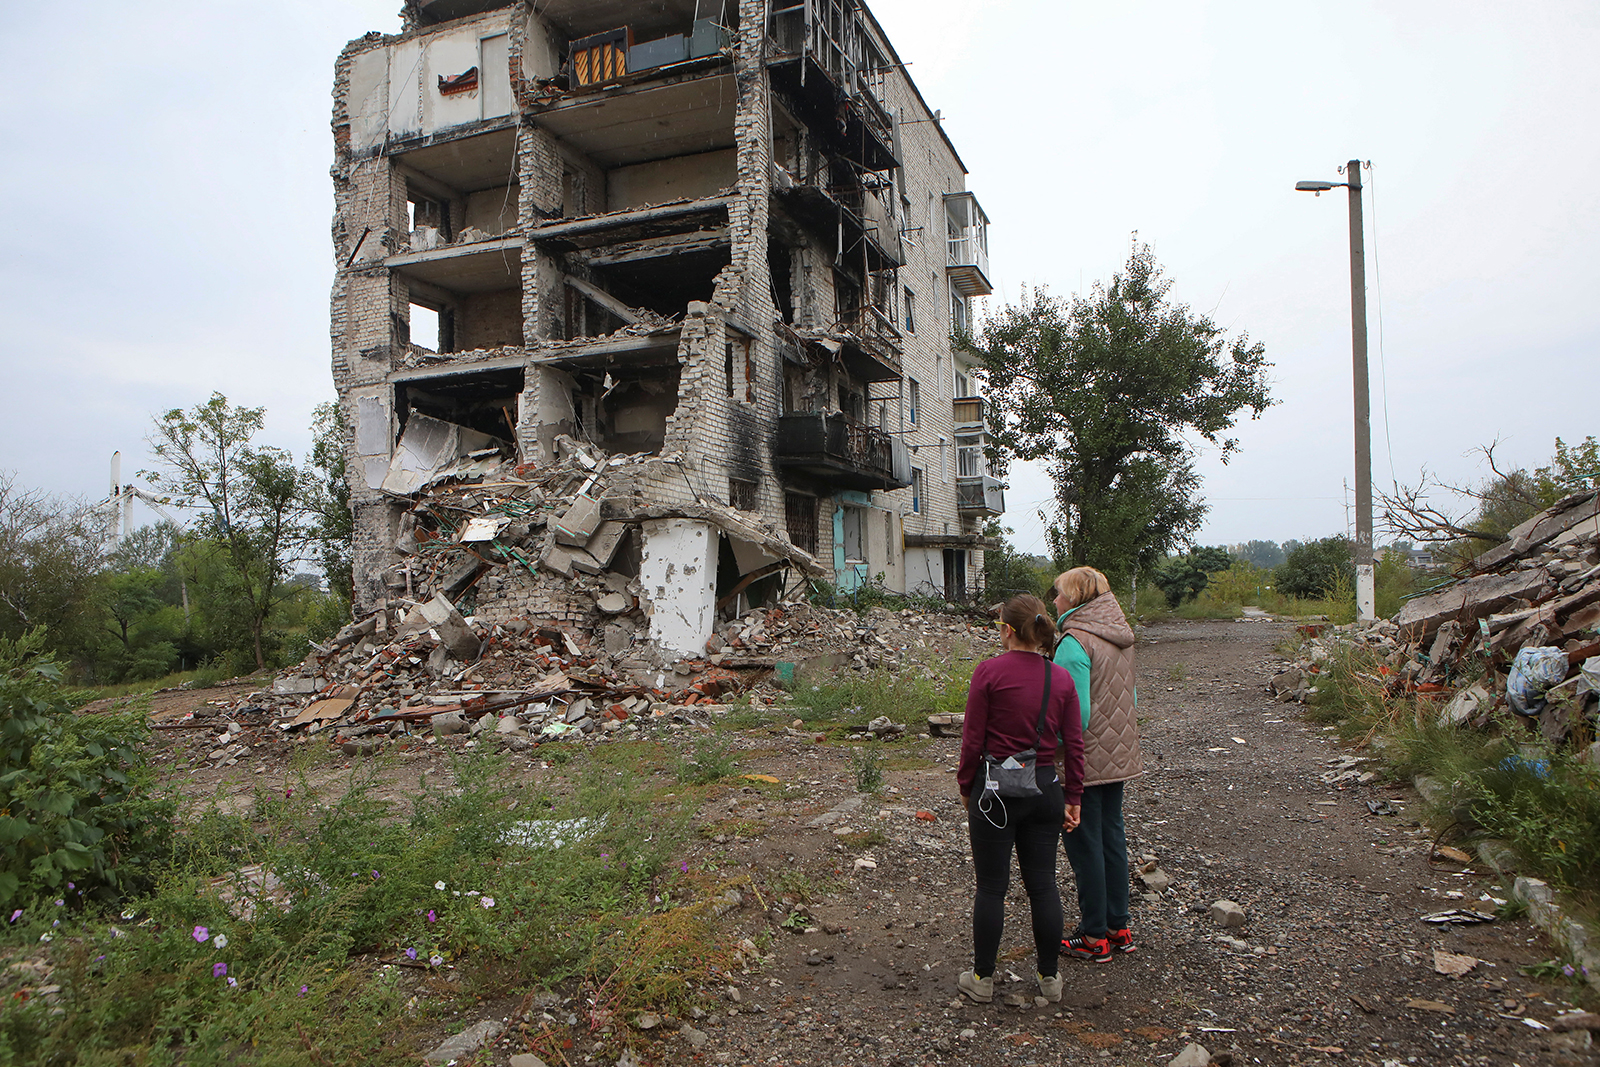 Women stand near a residential building destroyed by a military strike in the town of Izium recently liberated by the Ukrainian Armed Forces on September 15.